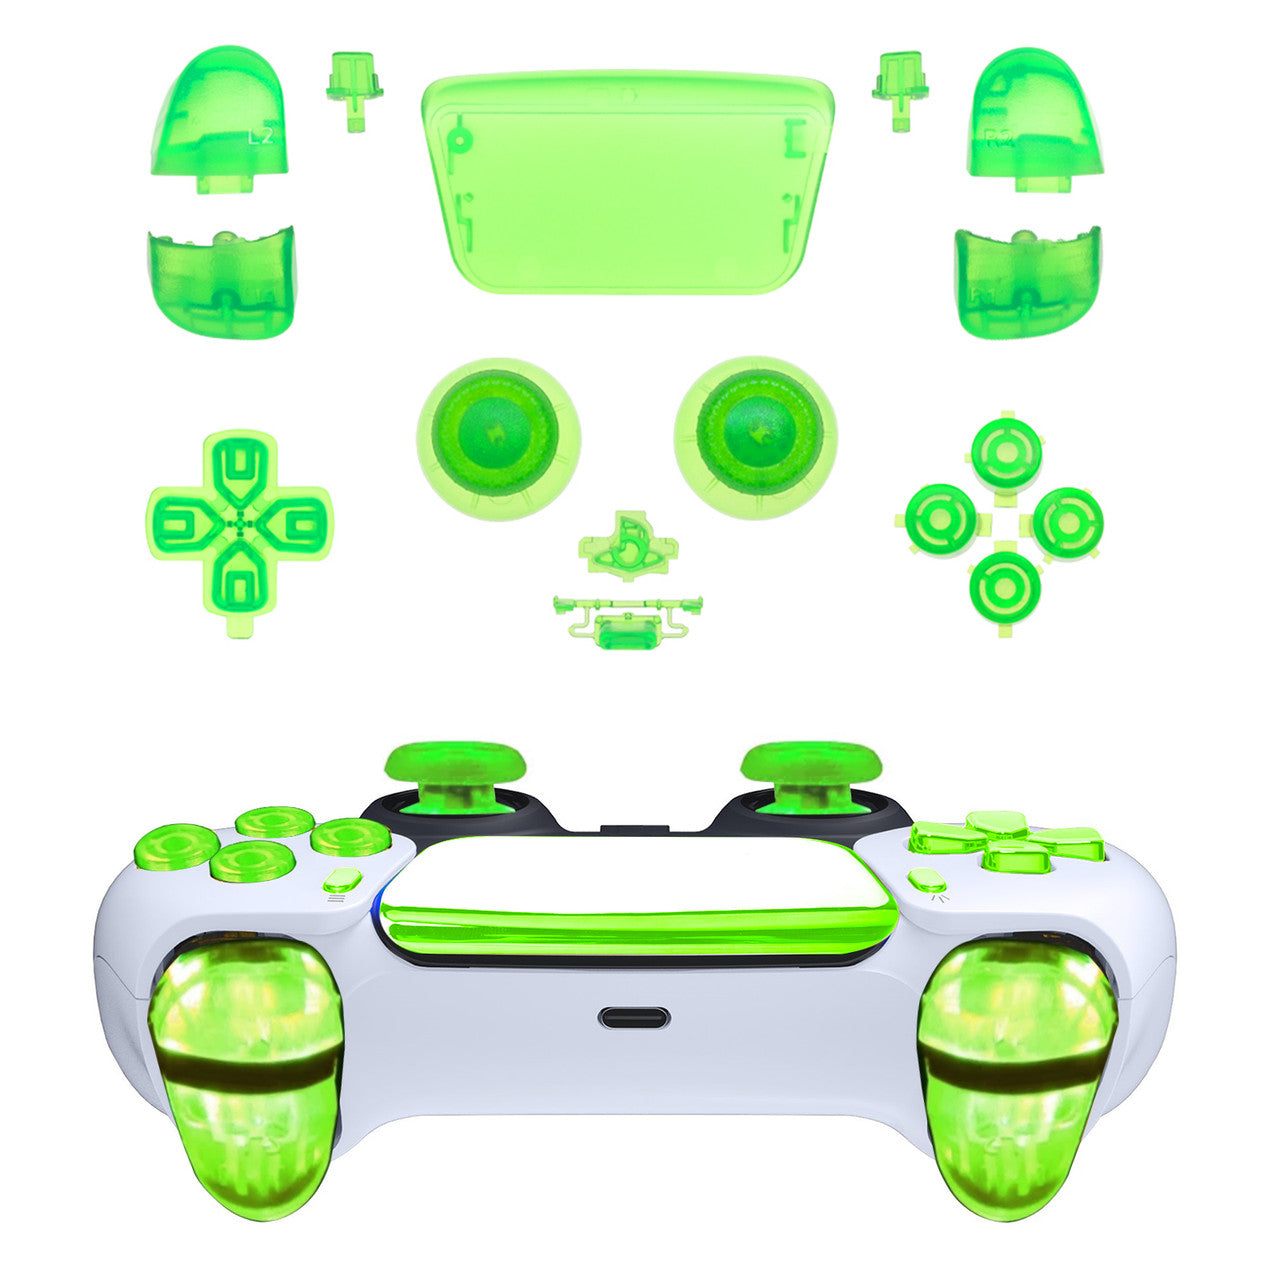 D-Pad Button Set for PS5 - Replacement Dpad R1 L1 R2 L2 Triggers Share Options Face Buttons Clear Blue Full Set Buttons  (Fluorescent Green)